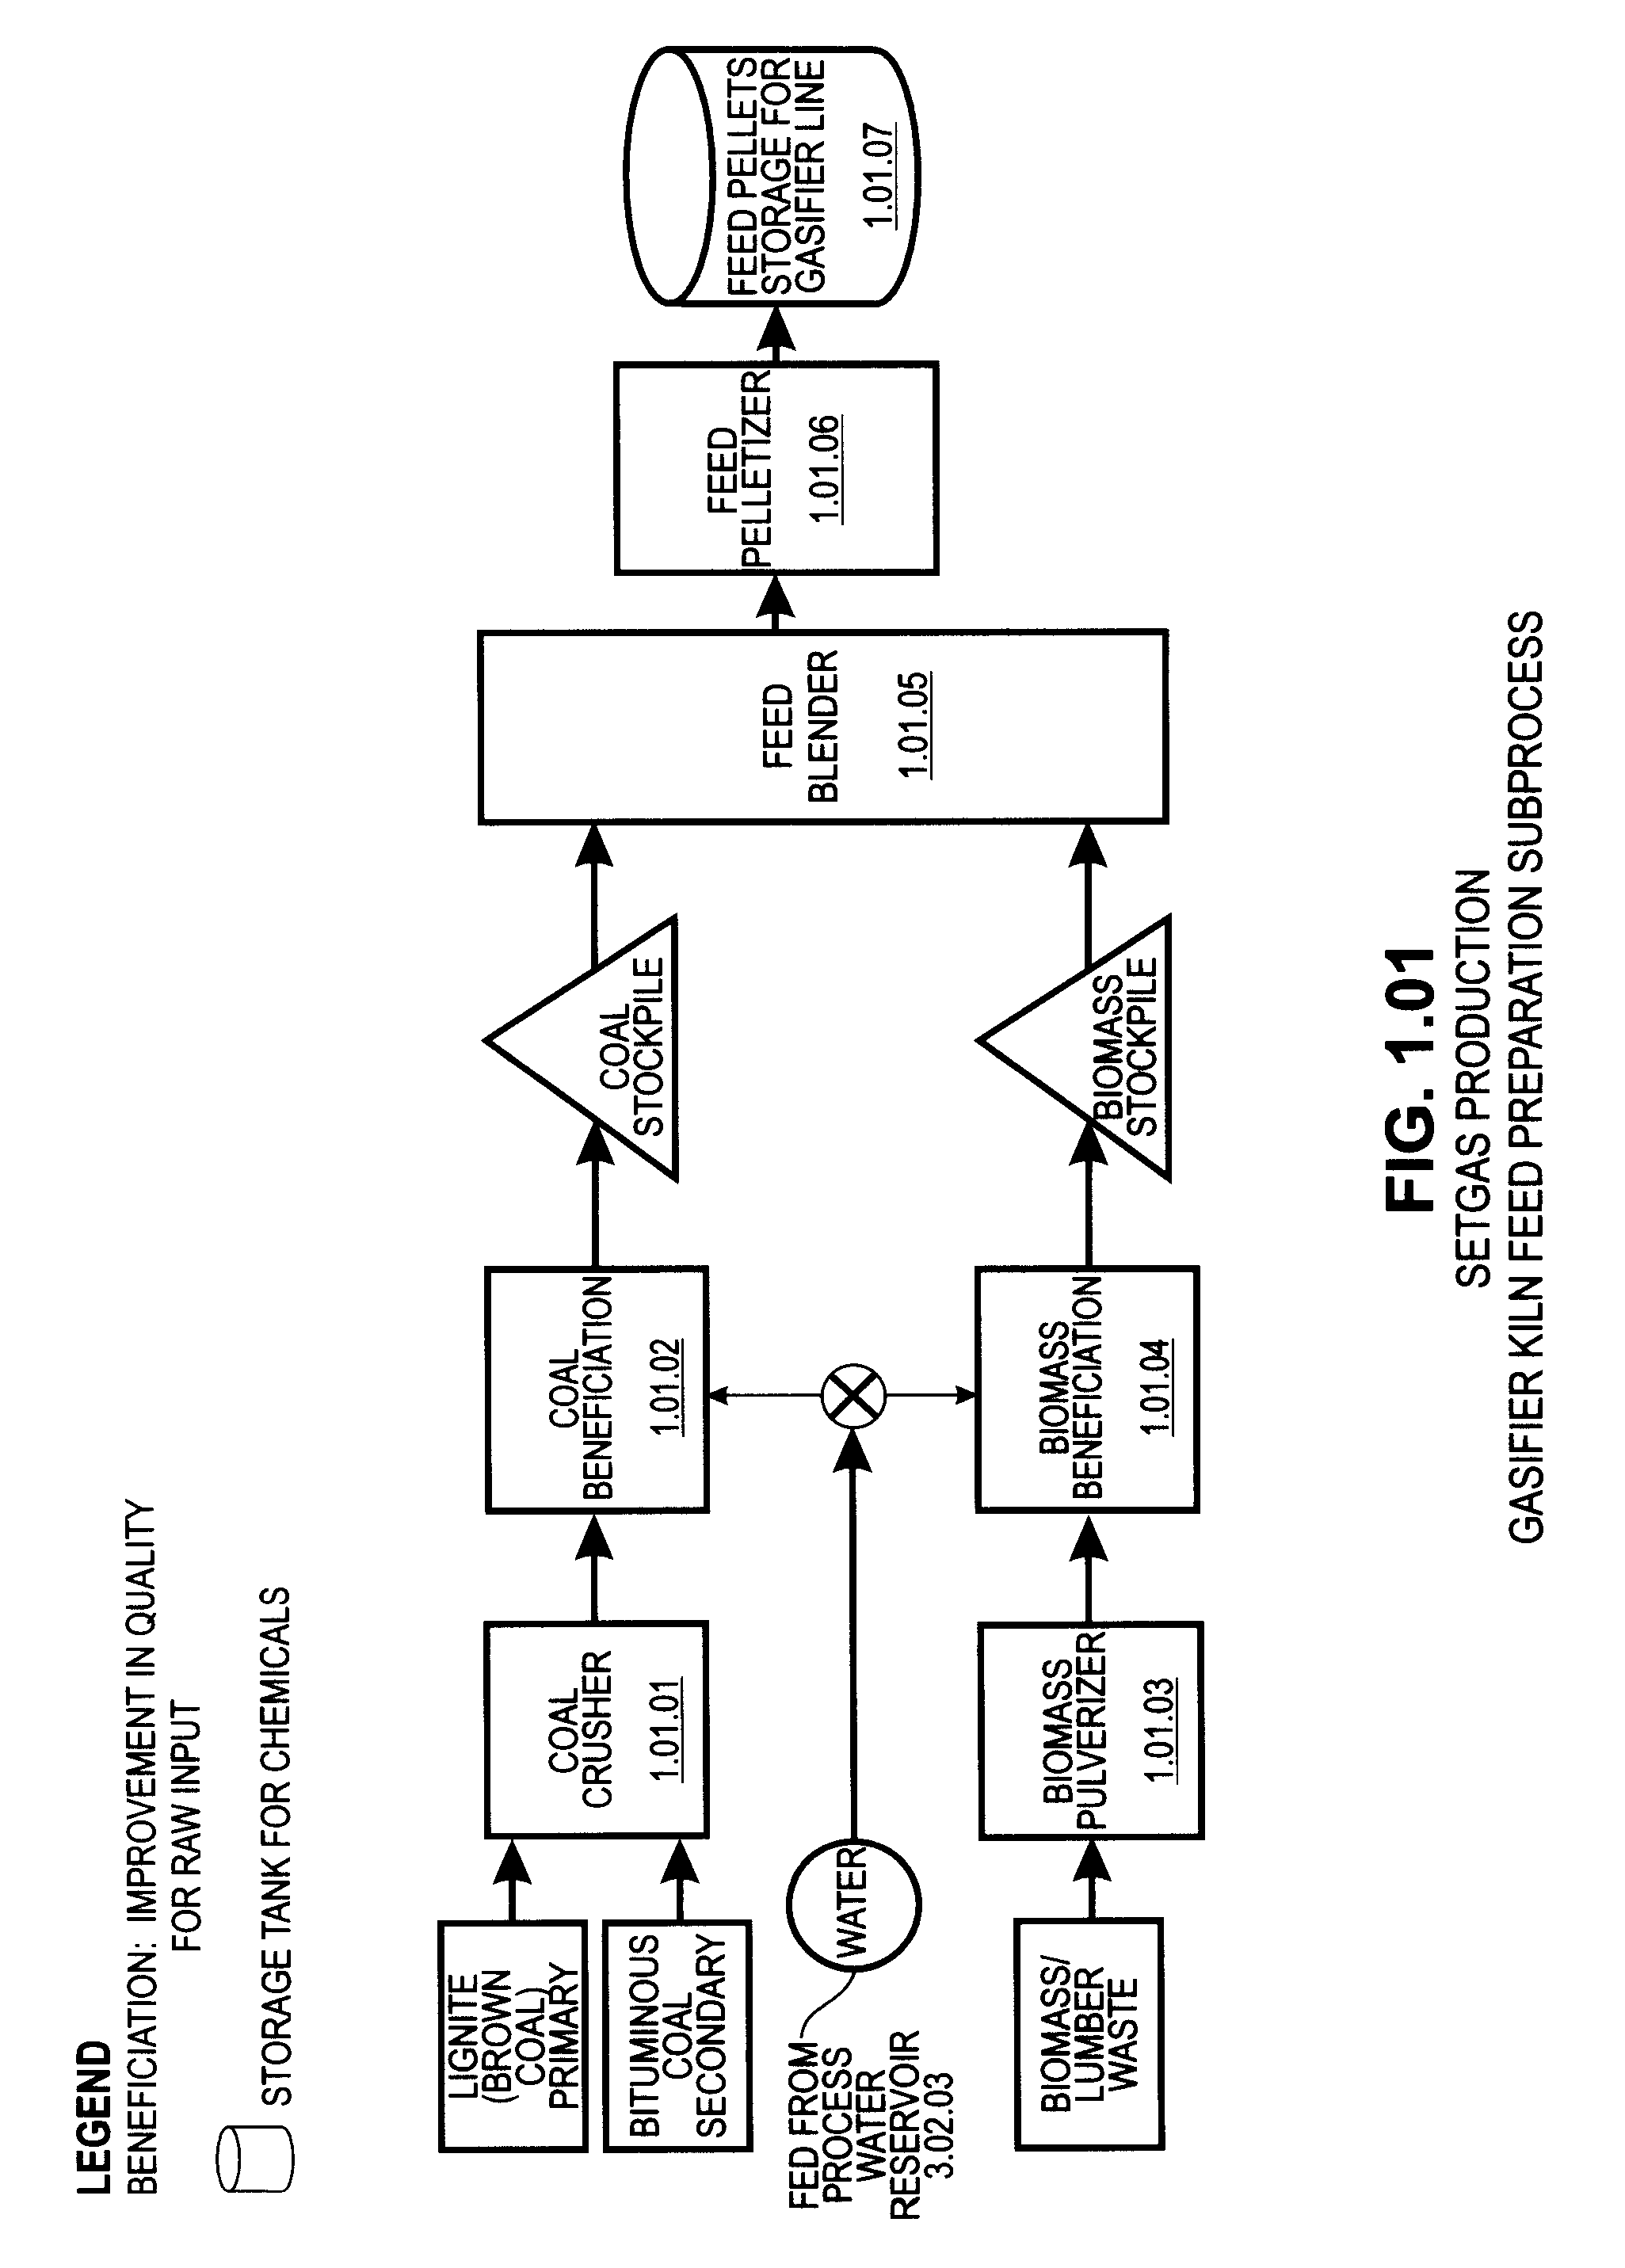 Zero emission gasification, power generation, carbon oxides management and metallurgical reduction processes, apparatus, systems, and integration thereof